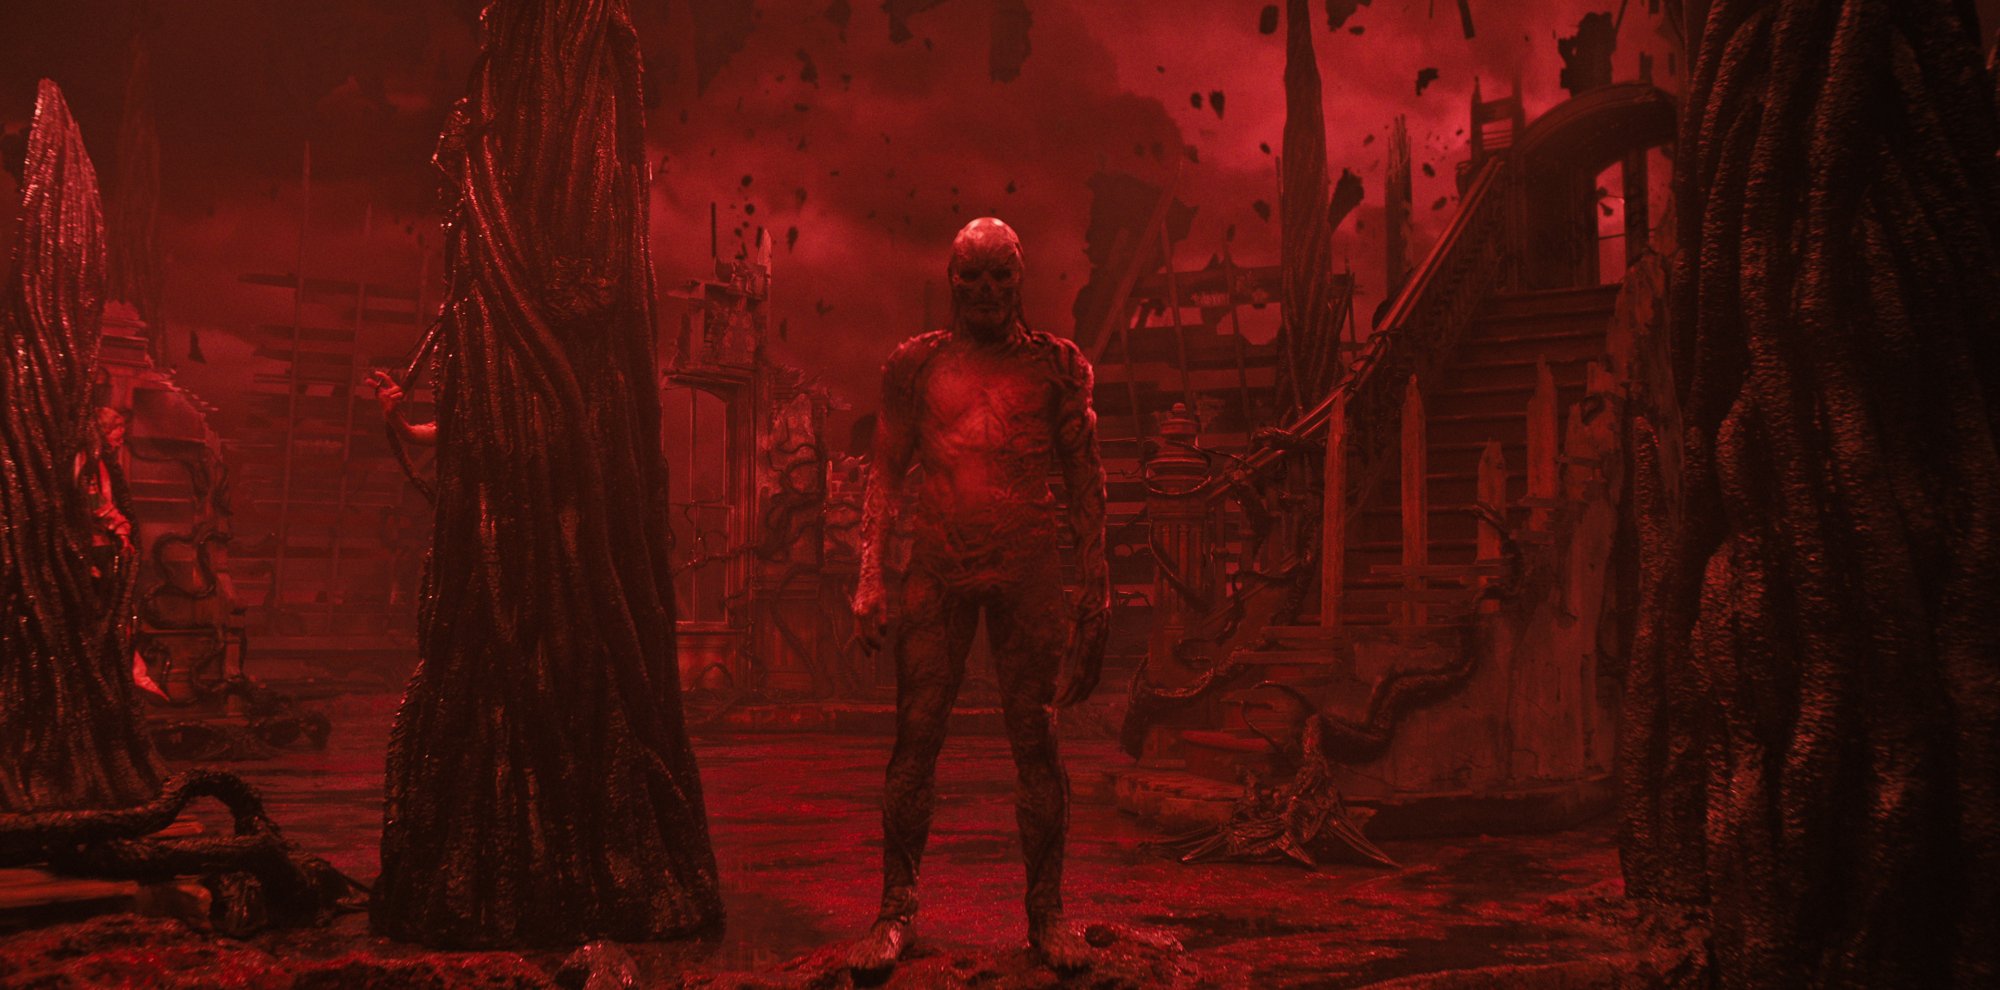 A humanoid figure covered in tentacles stands menacingly in a red, hellish landscape.